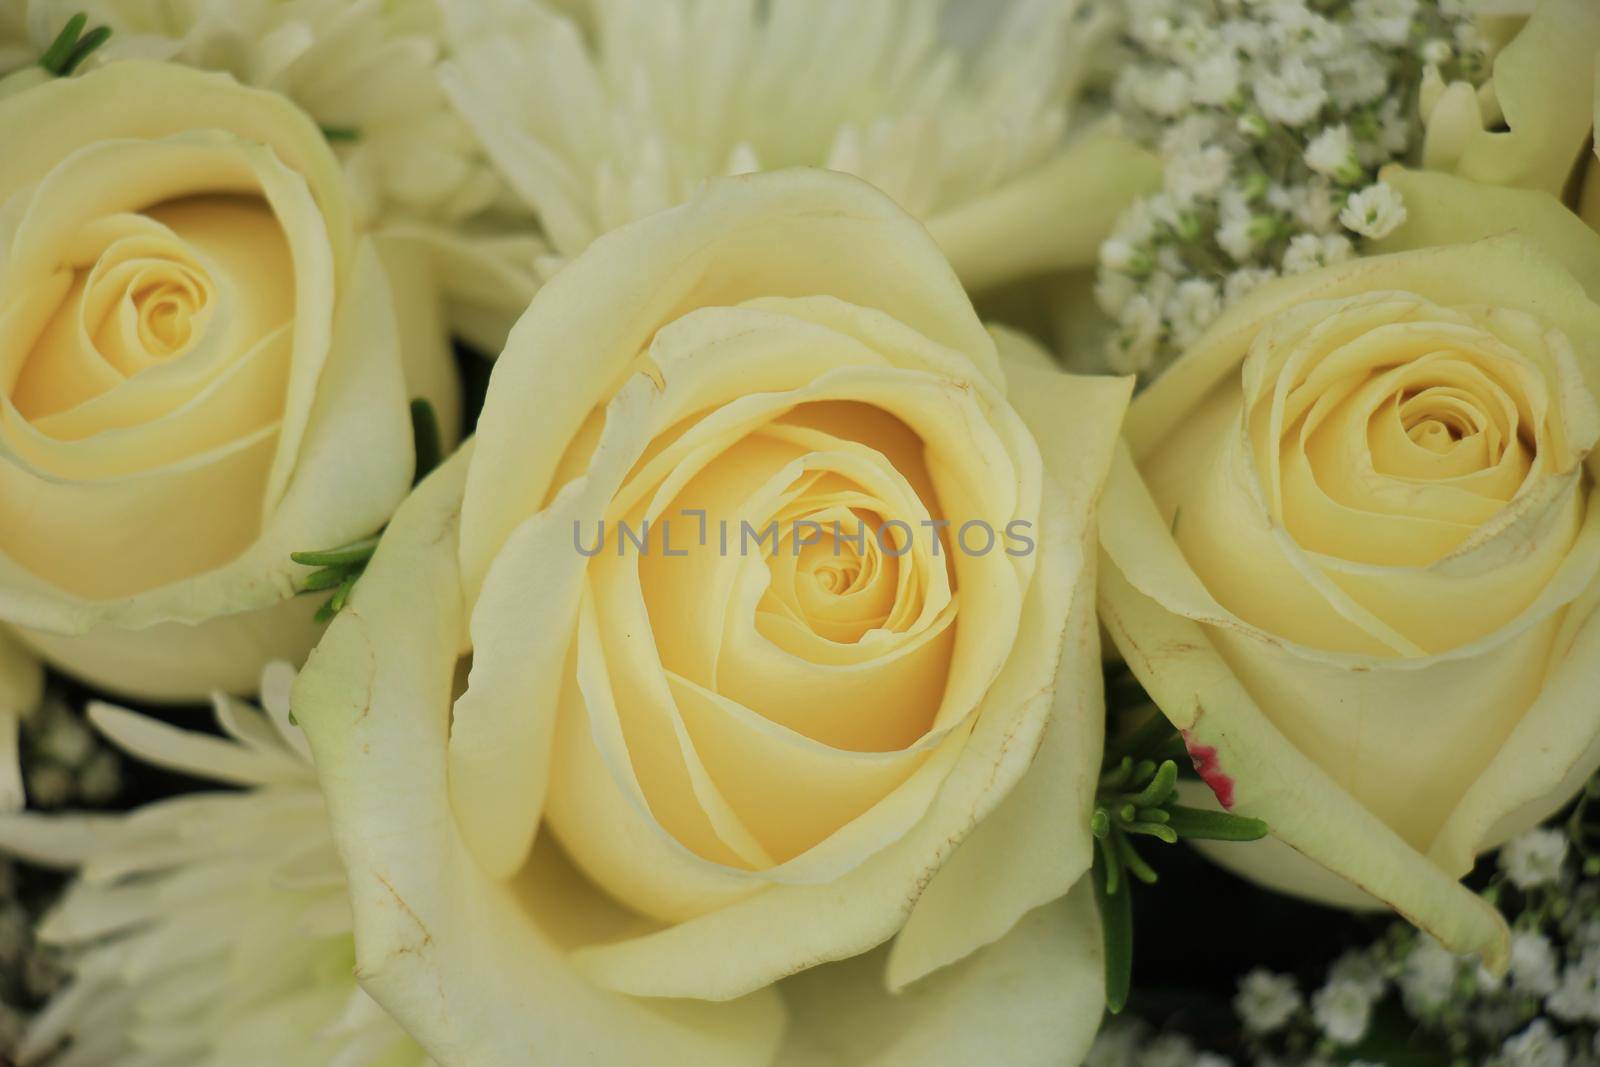 White roses in a floral wedding decoration